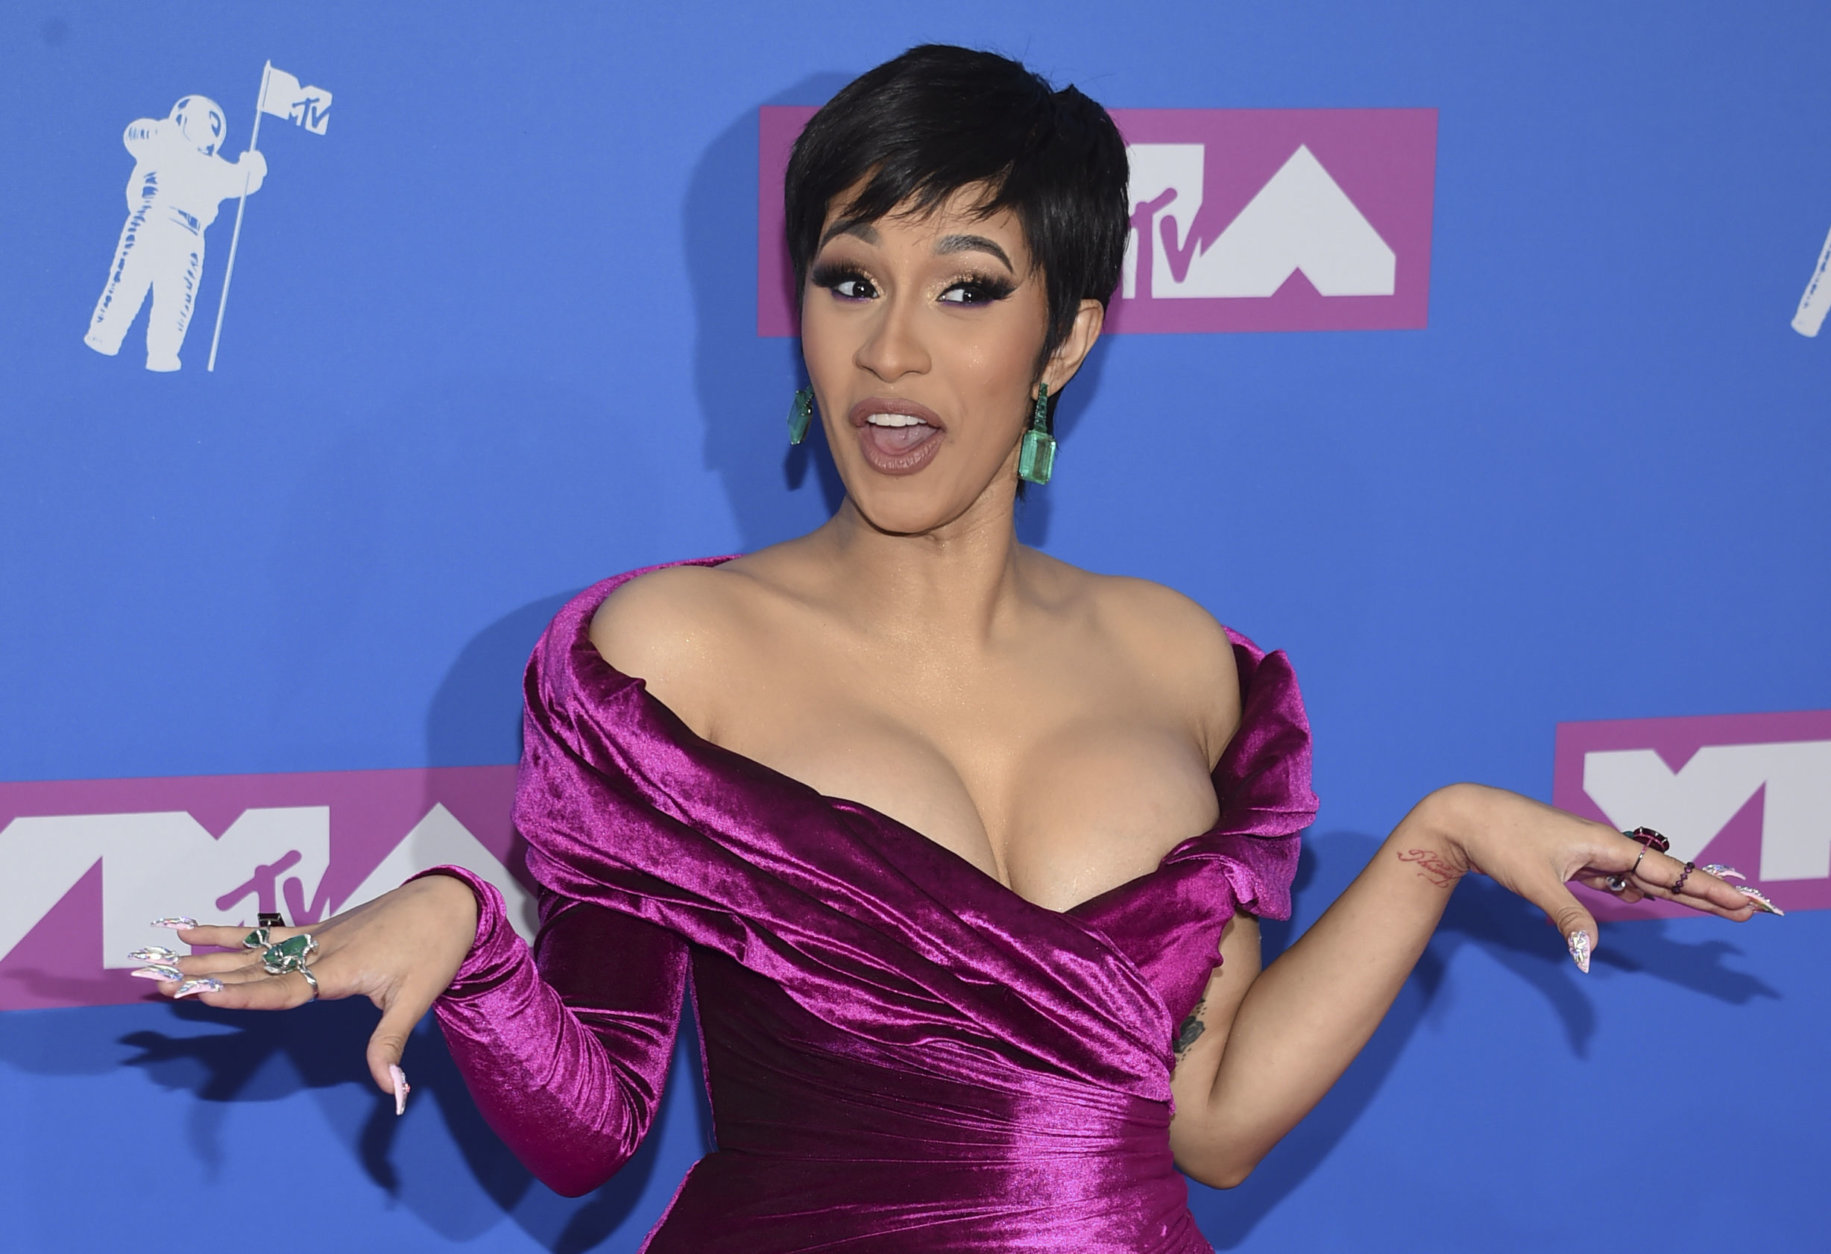 Cardi B arrives at the MTV Video Music Awards at Radio City Music Hall on Monday, Aug. 20, 2018, in New York. (Photo by Evan Agostini/Invision/AP)